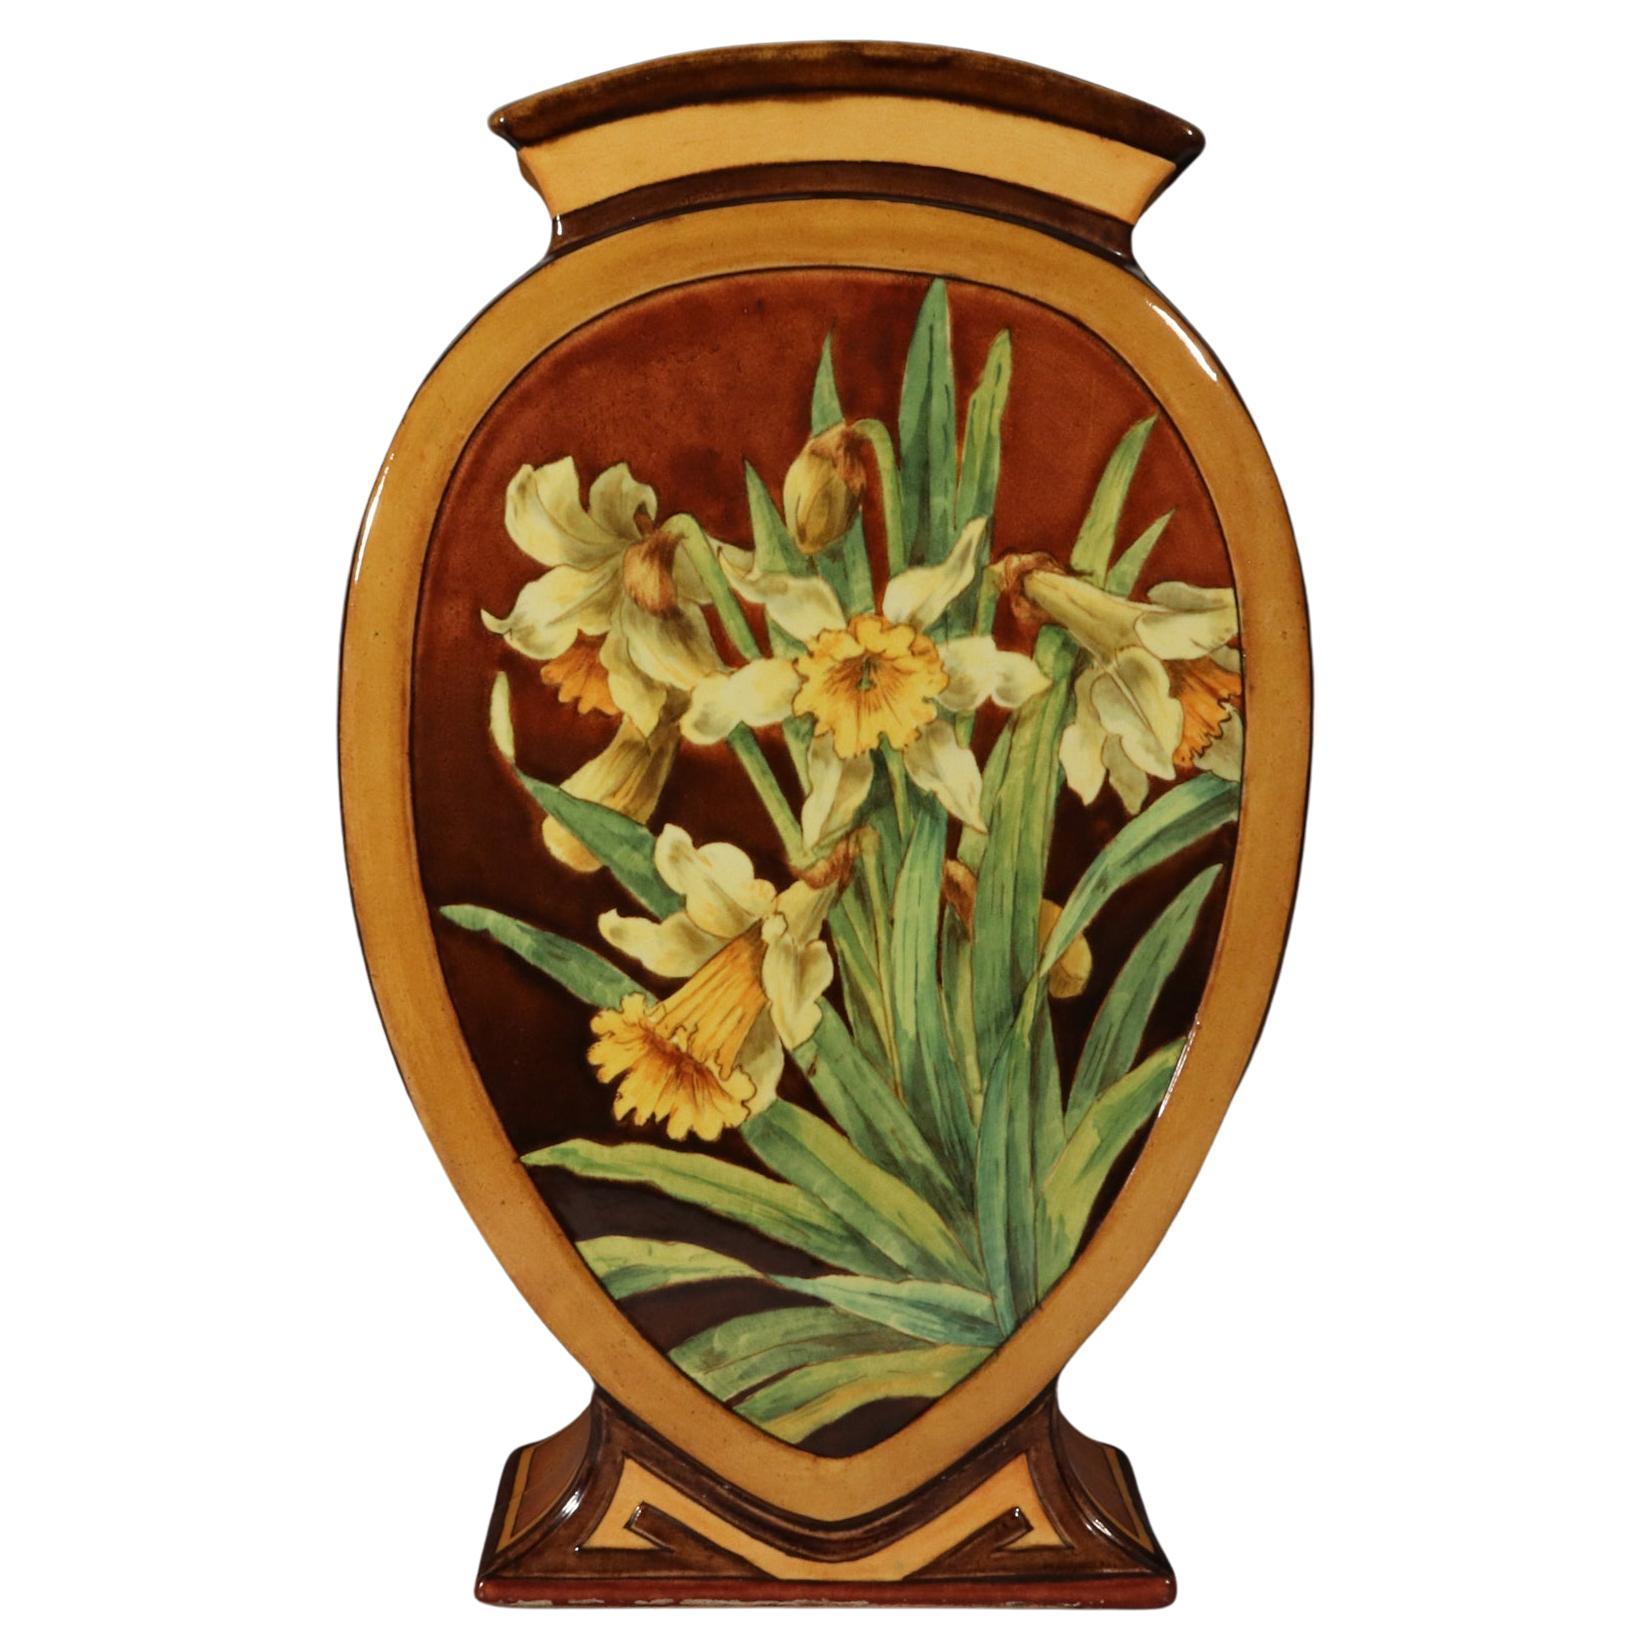 Doulton Faience Shaped Botanical Pottery Vase Signed by Artist Mary M Arding For Sale